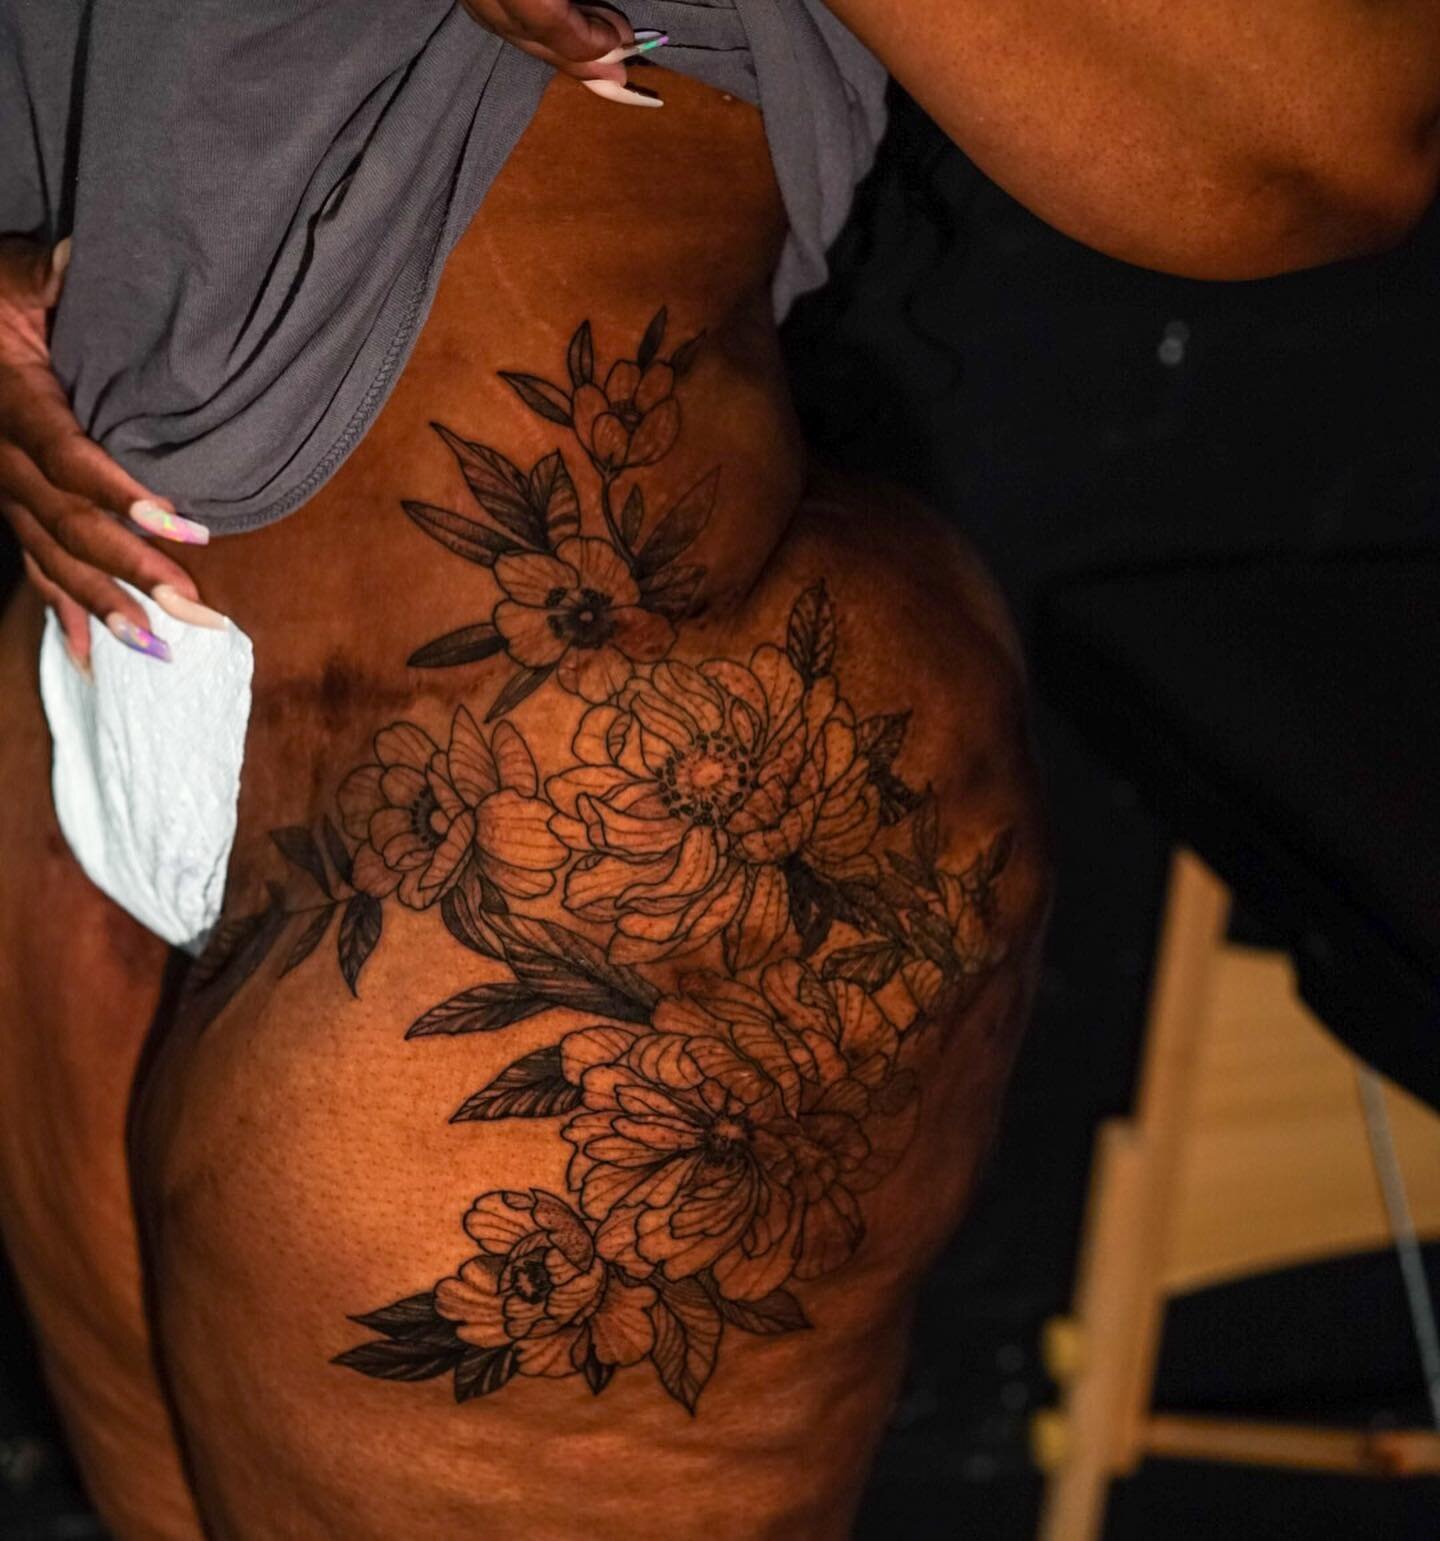 It was an honor to tattoo over your scars, Carolyn ❤️✨ 
&bull;
&bull;
&bull;
#scartattoo #coveruptattoo #floraltattoo #tttism #tttpublishing #blackworkers #botanicaltattoo #hiralupe #nytattooartist #latattooartist #losangeles #gayweho